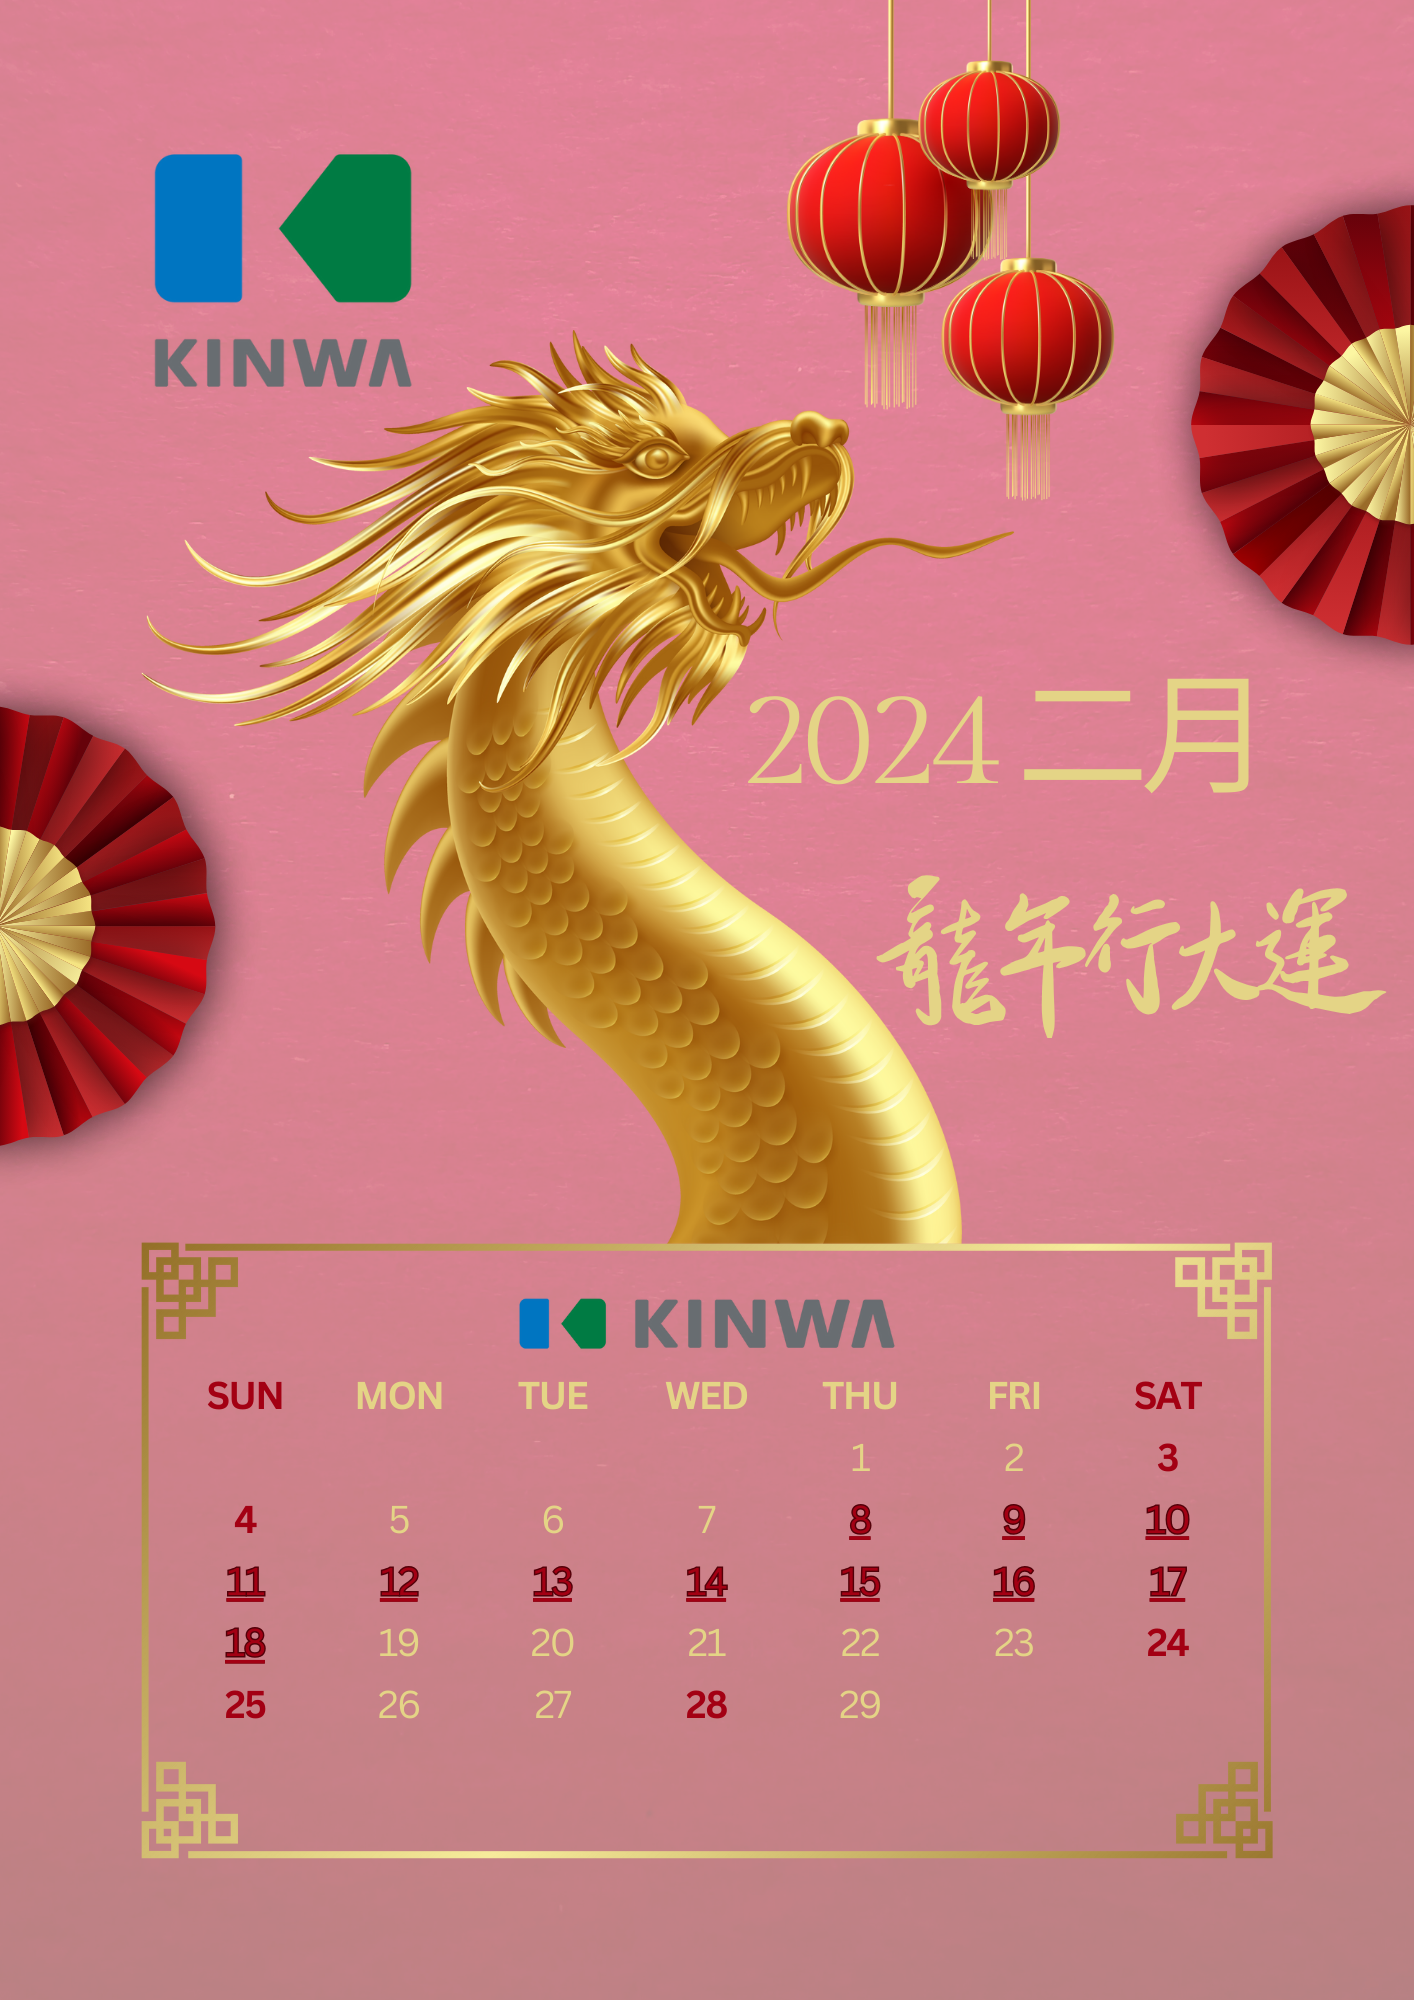 Kinwa Lathe Celebrates the 2024 Lunar New Year: Holiday Notice and Greetings